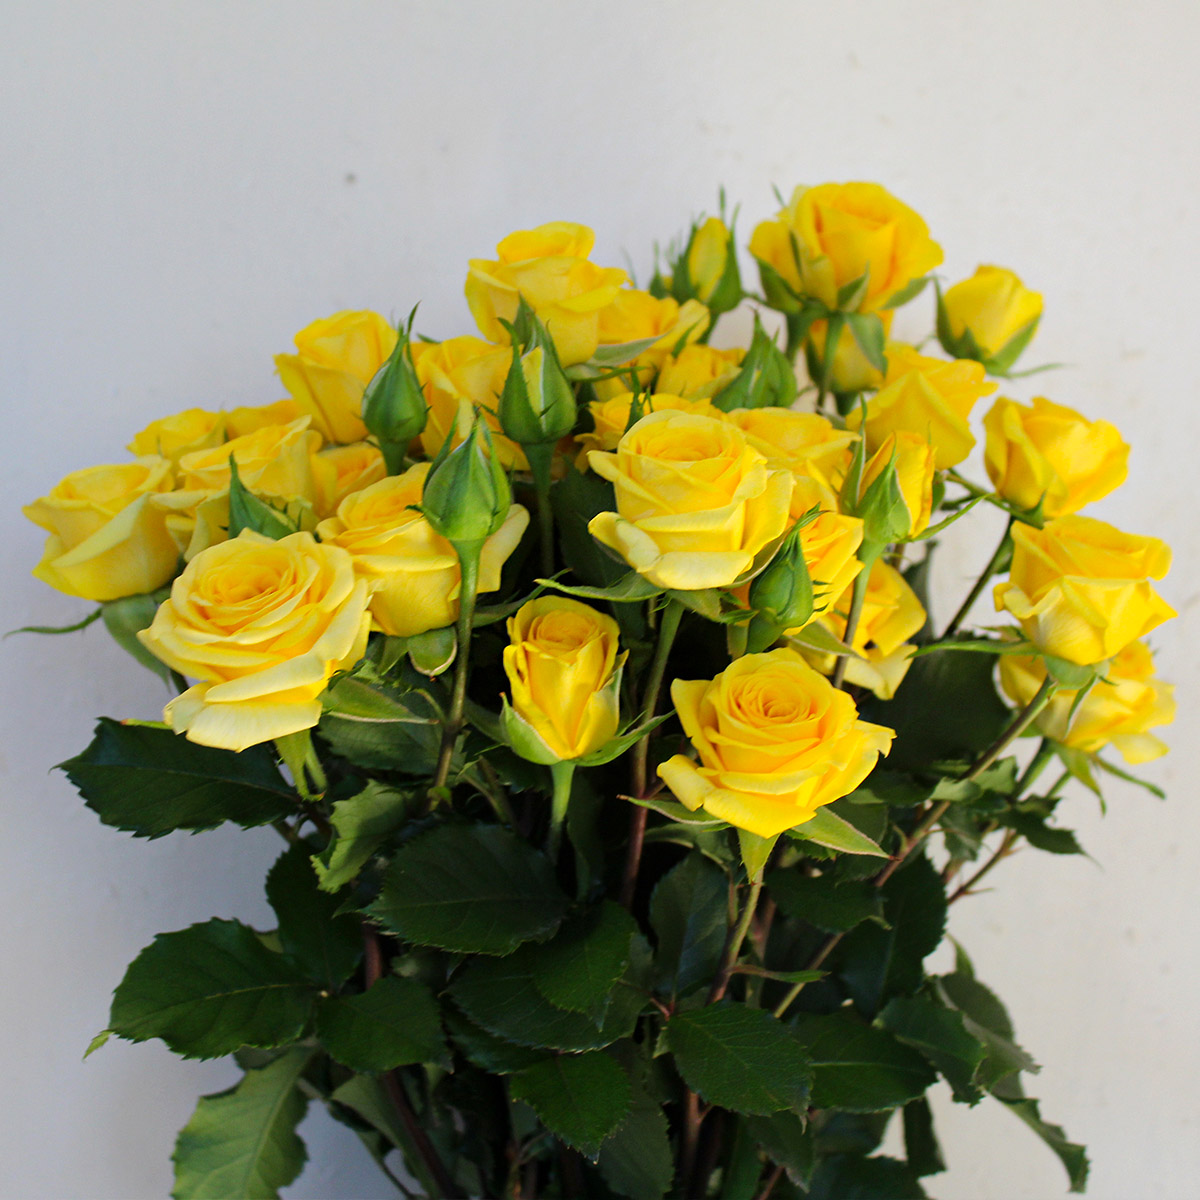 Open Up to Spray Roses - Golden Blossoms 01